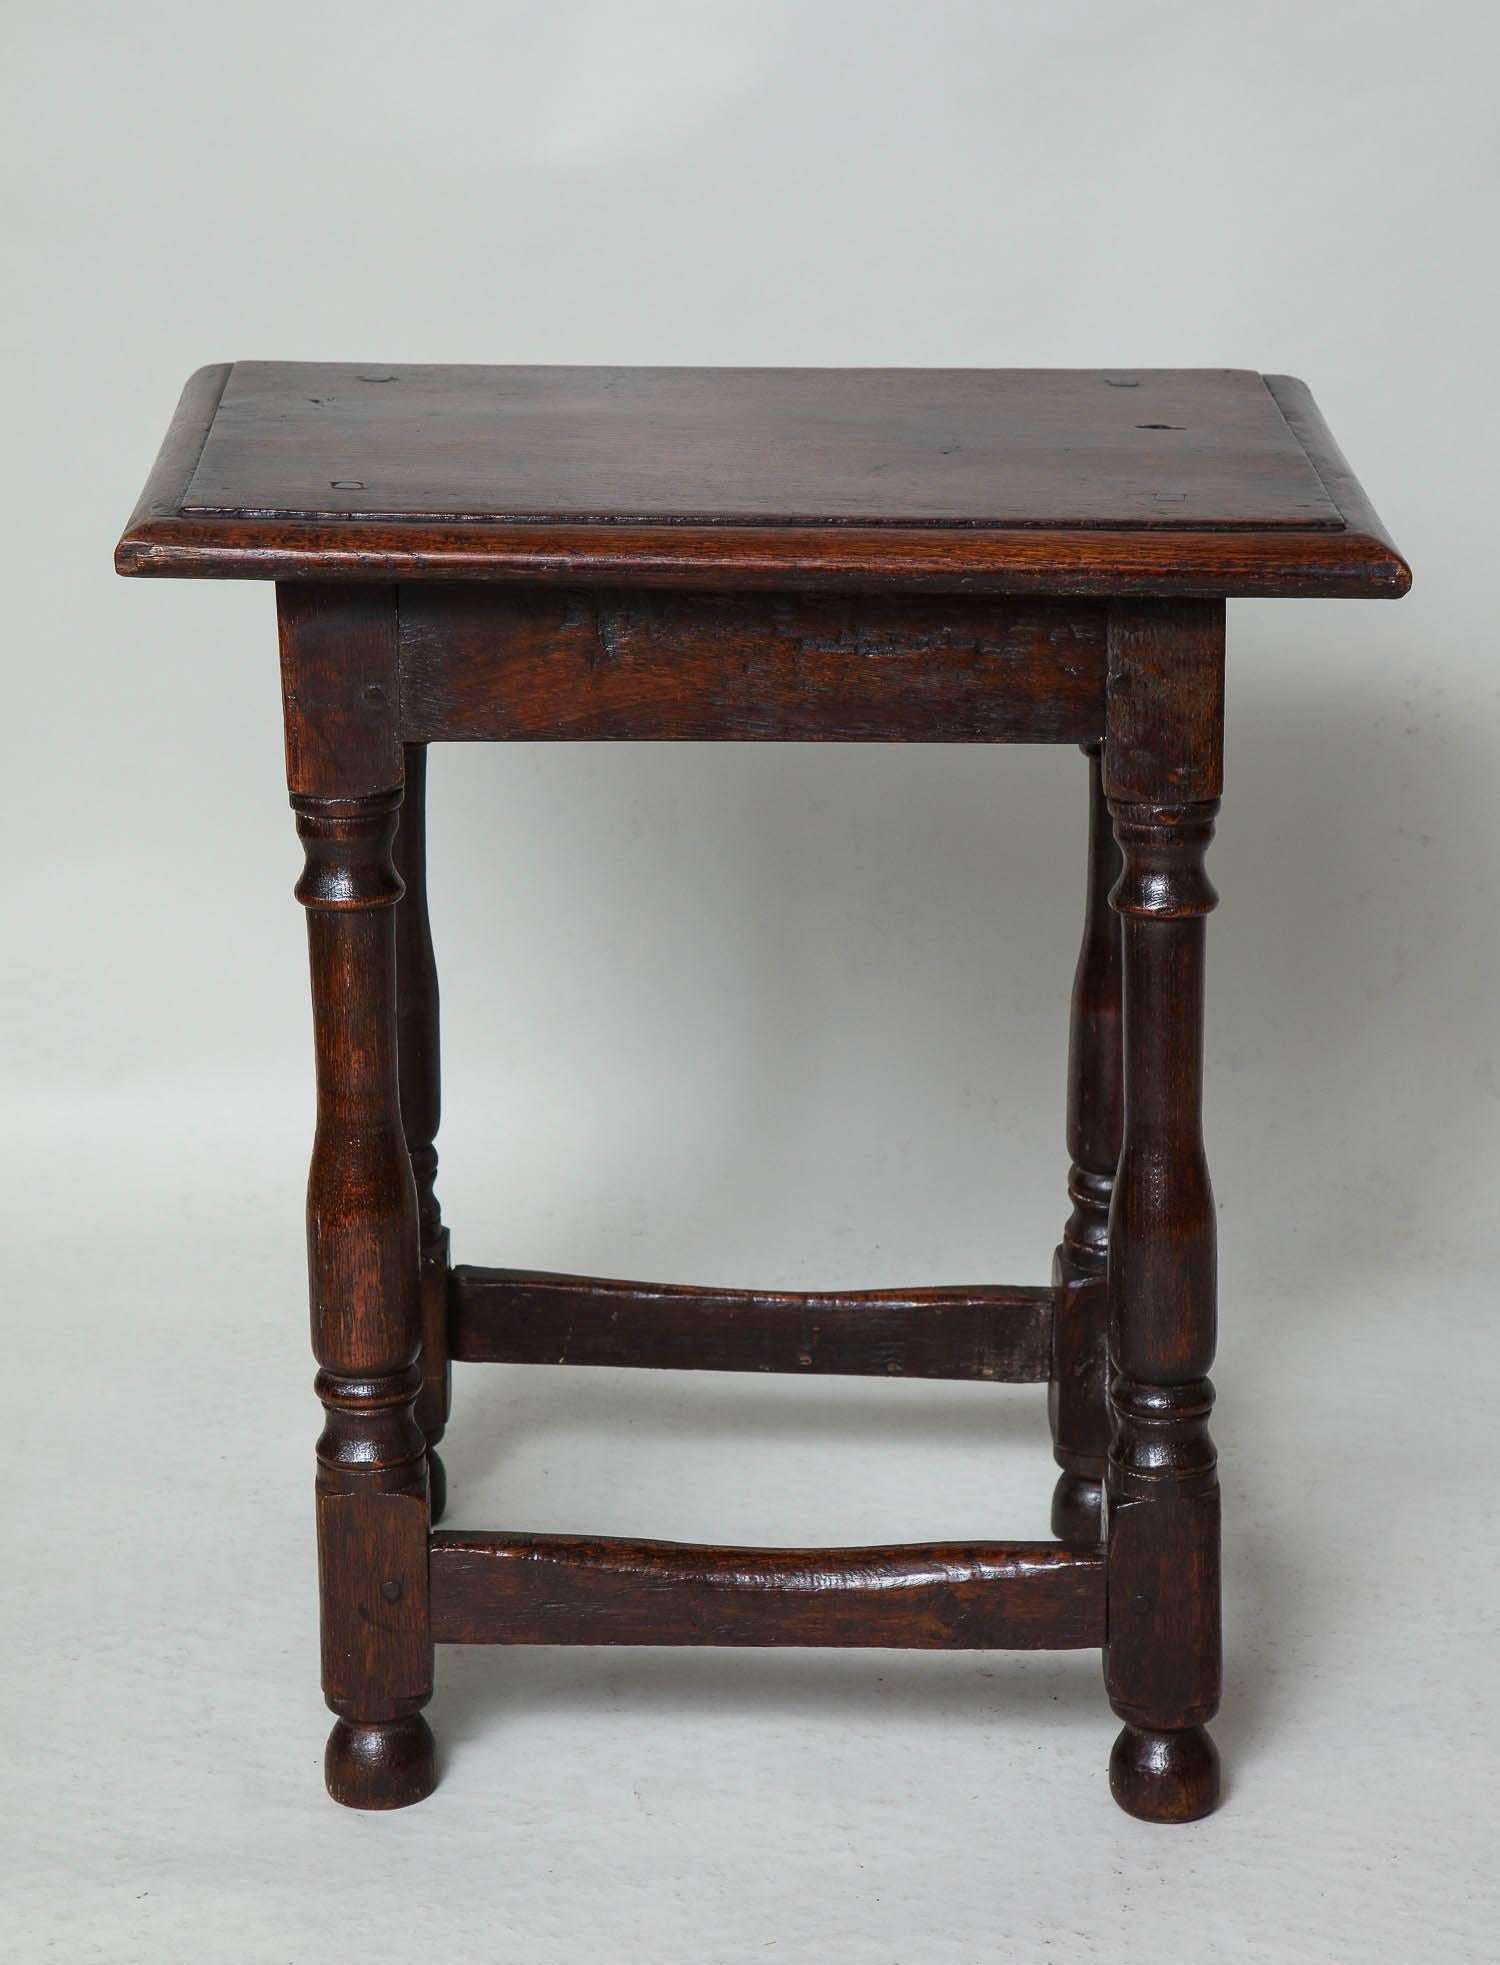 Good 19th century English oak centre table/joint stool with thumb molded top over balustrade turned legs joined by box stretchers and standing on original bun feet.
 